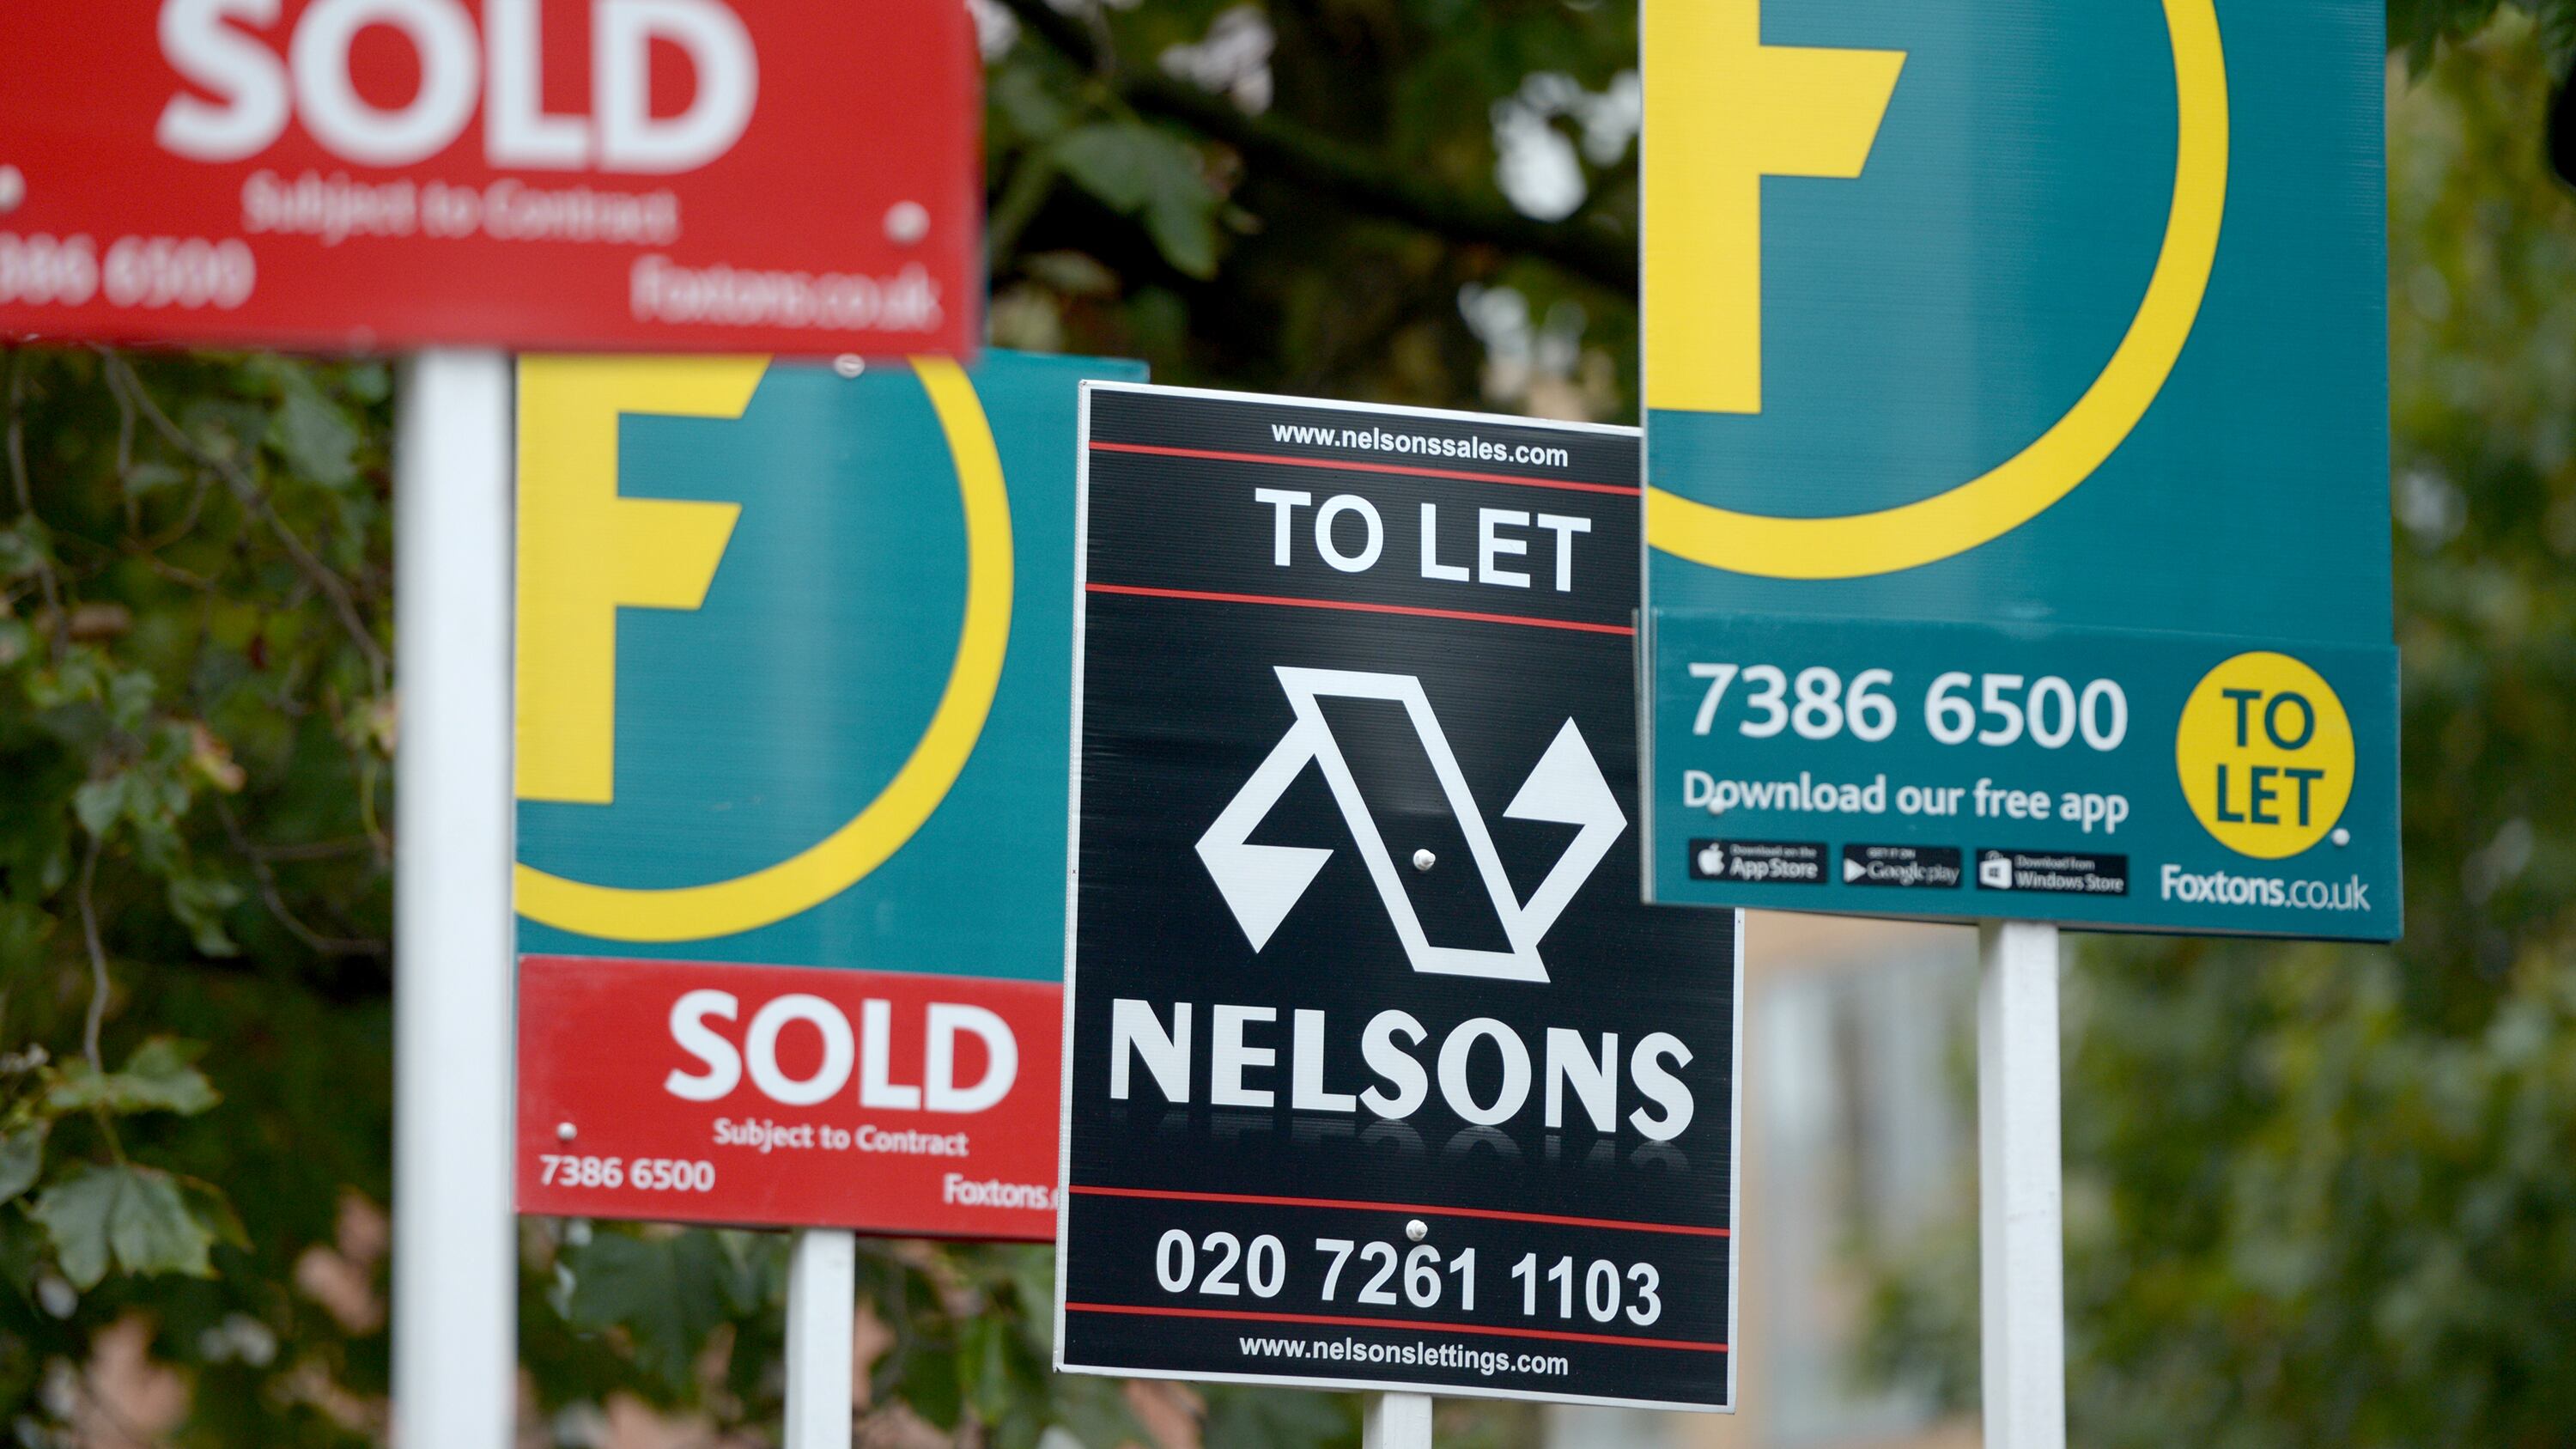 UK property prices fell by 0.4% month-on-month in April, following a 0.2% fall in March, Nationwide Building Society said